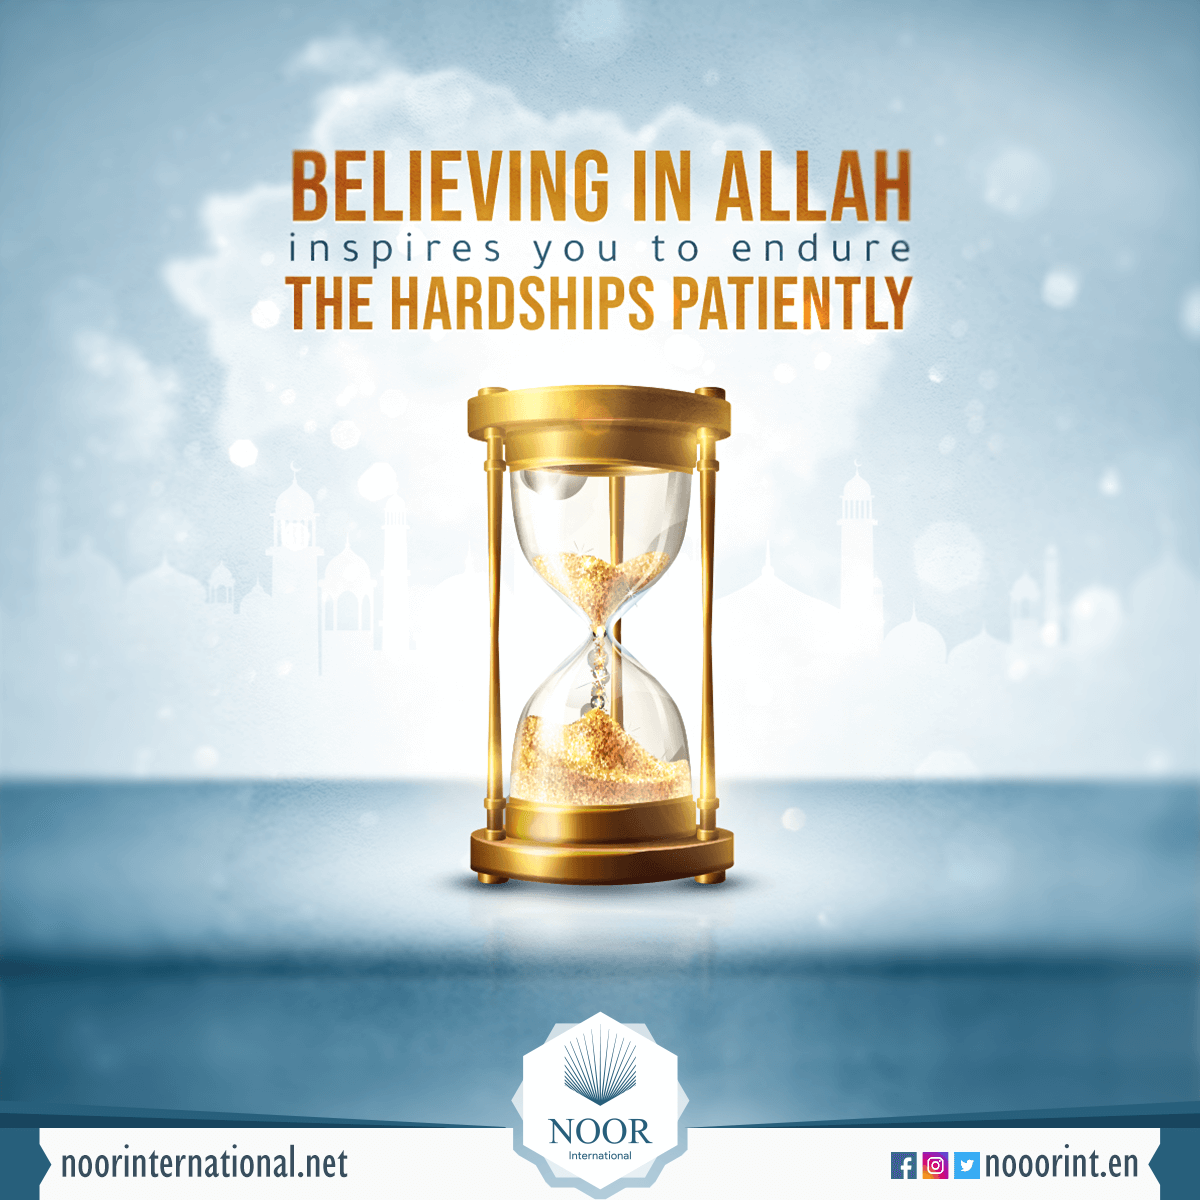 Believing in Allah inspires you to endure the hardships patiently